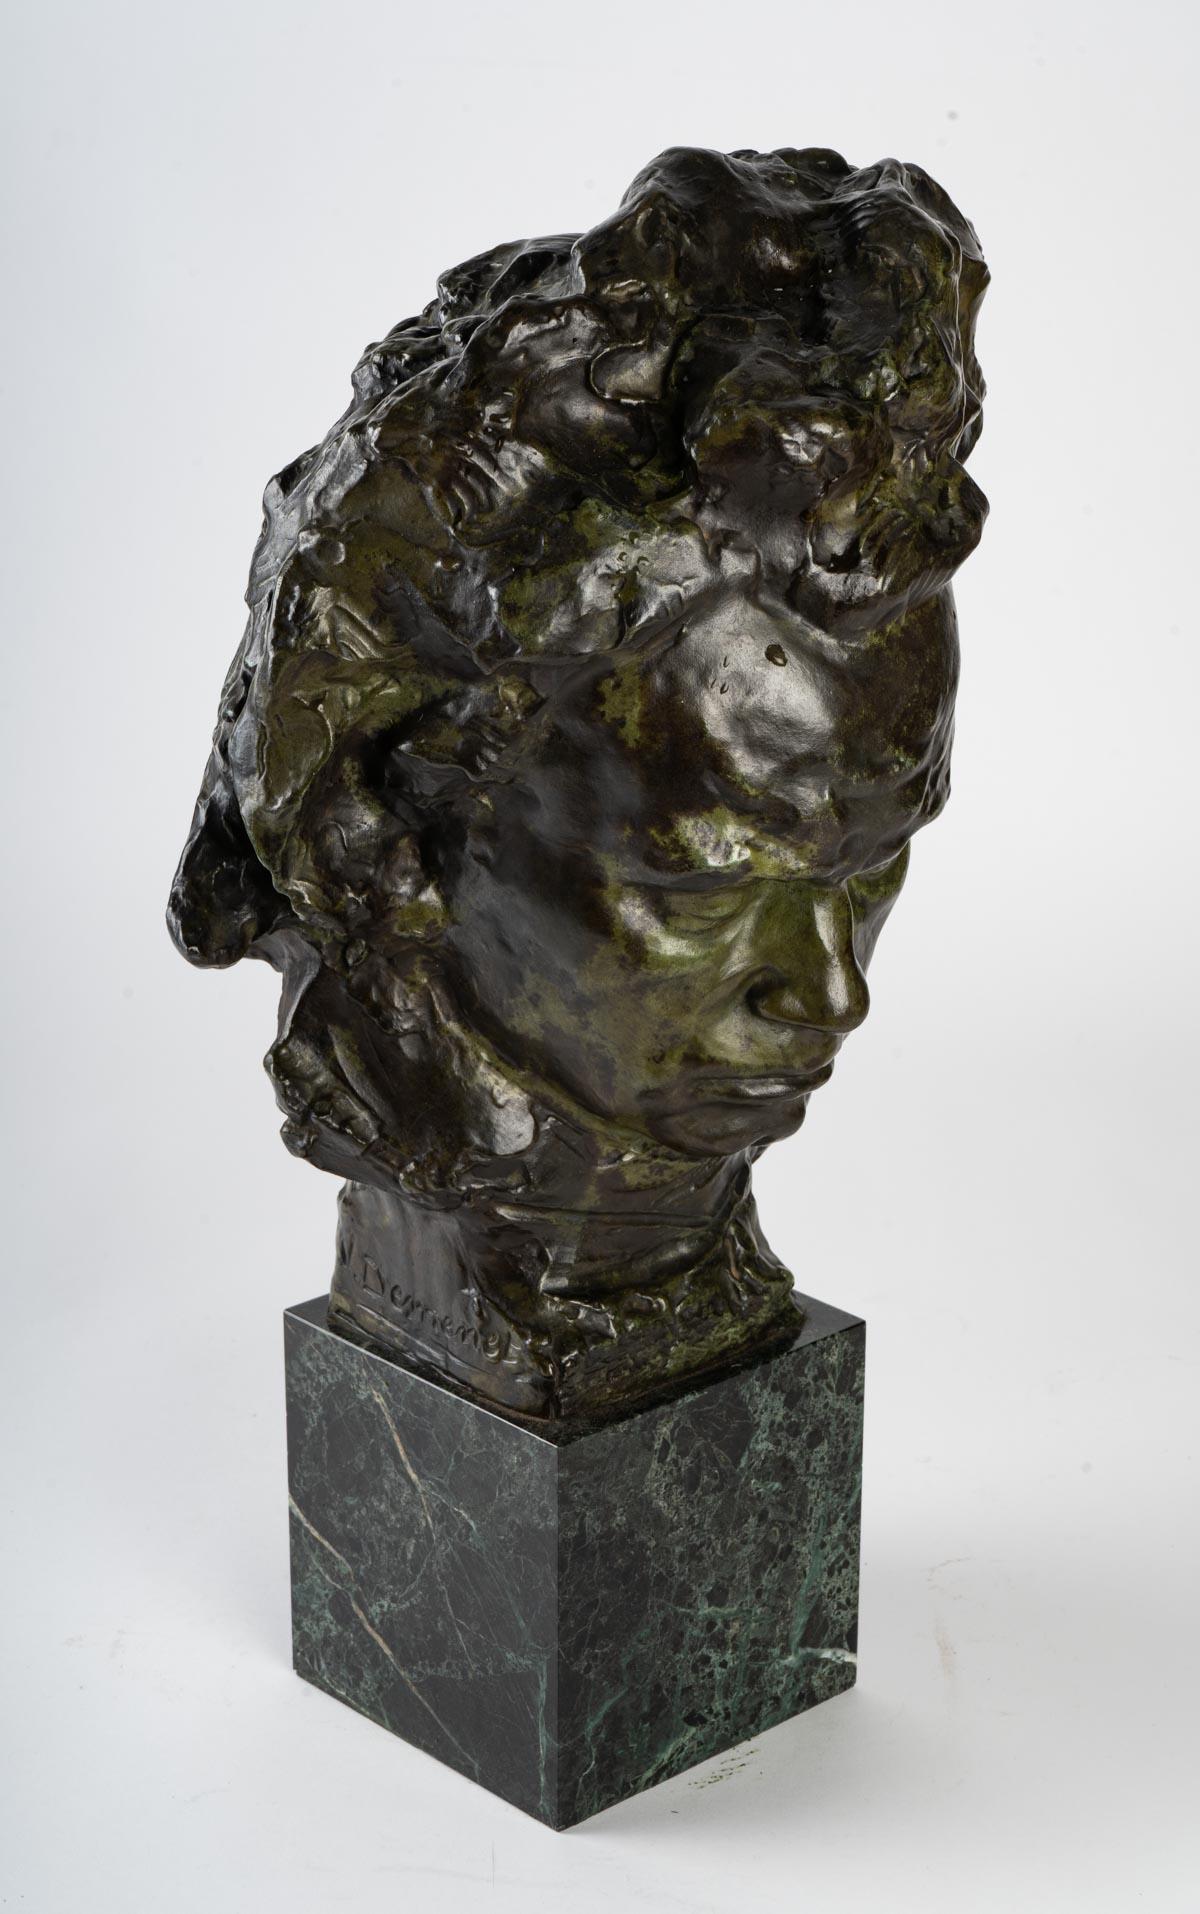 Sculpture of Beethoven in bronze and marble, early 20th century, V. Demanet.
Measures: H 51 cm, W 28 cm, D 25 cm.